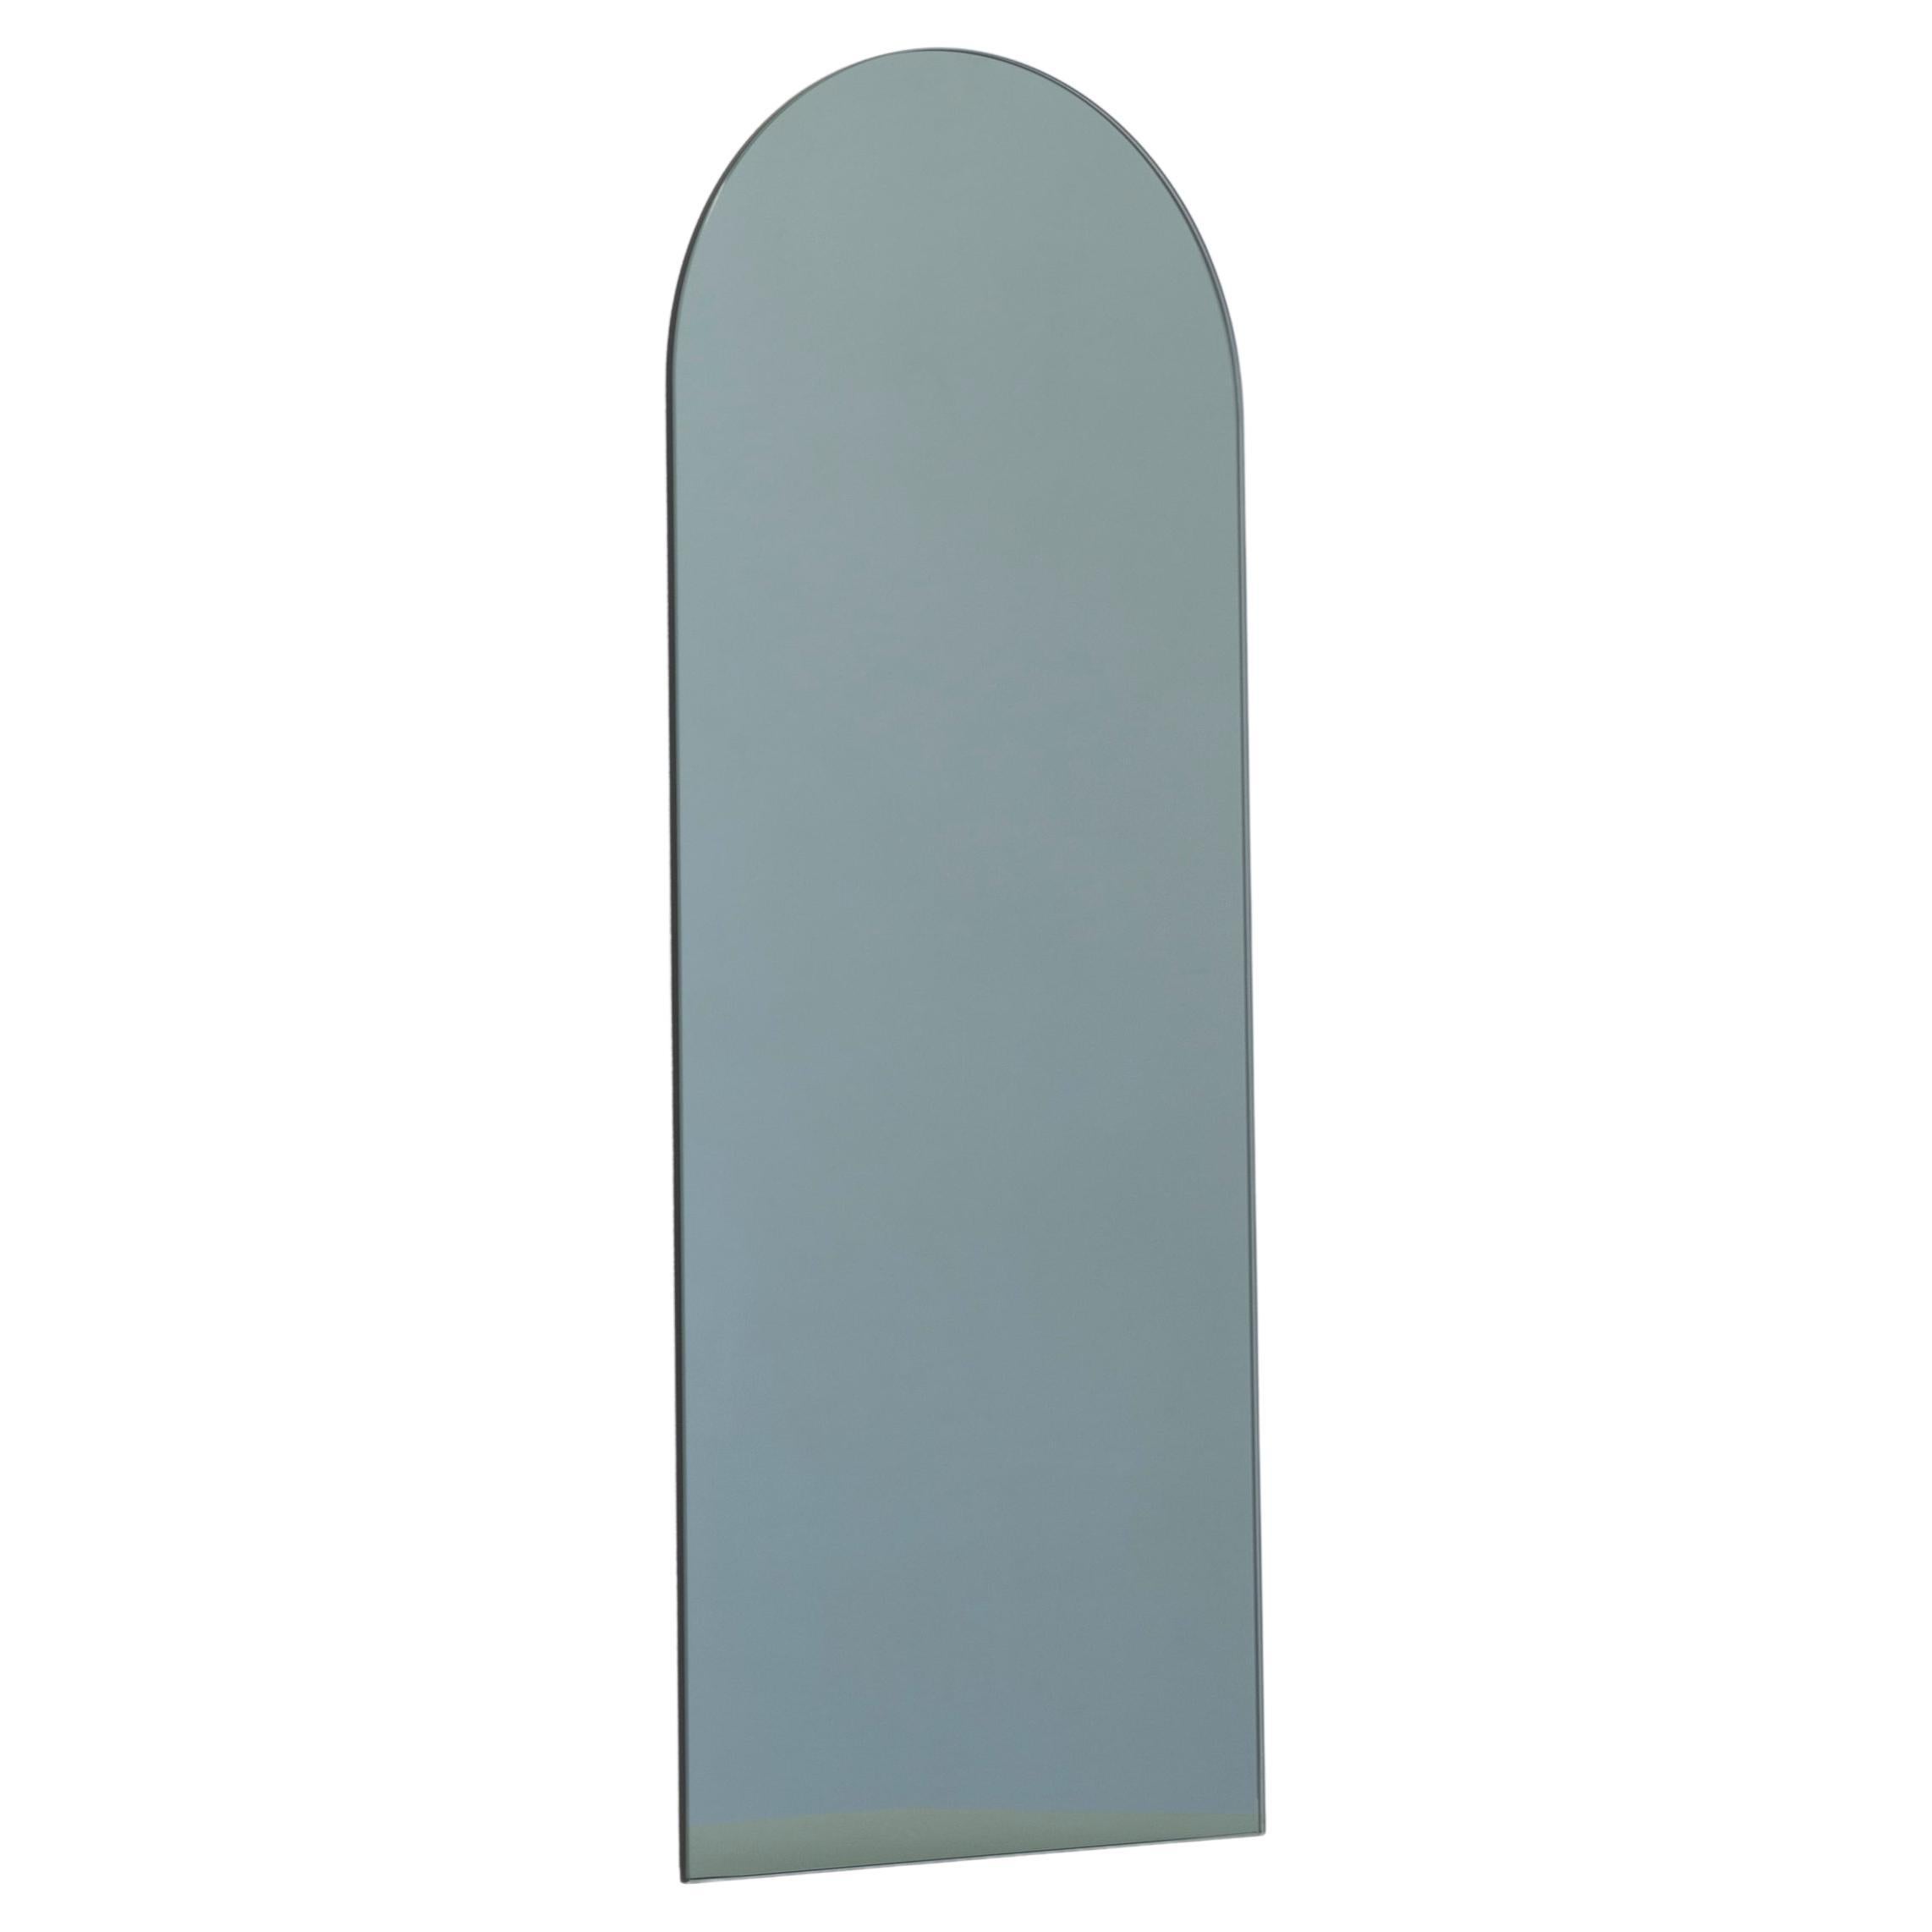 Arcus Black Tinted Arched Contemporary Bespoke Mirror, Small